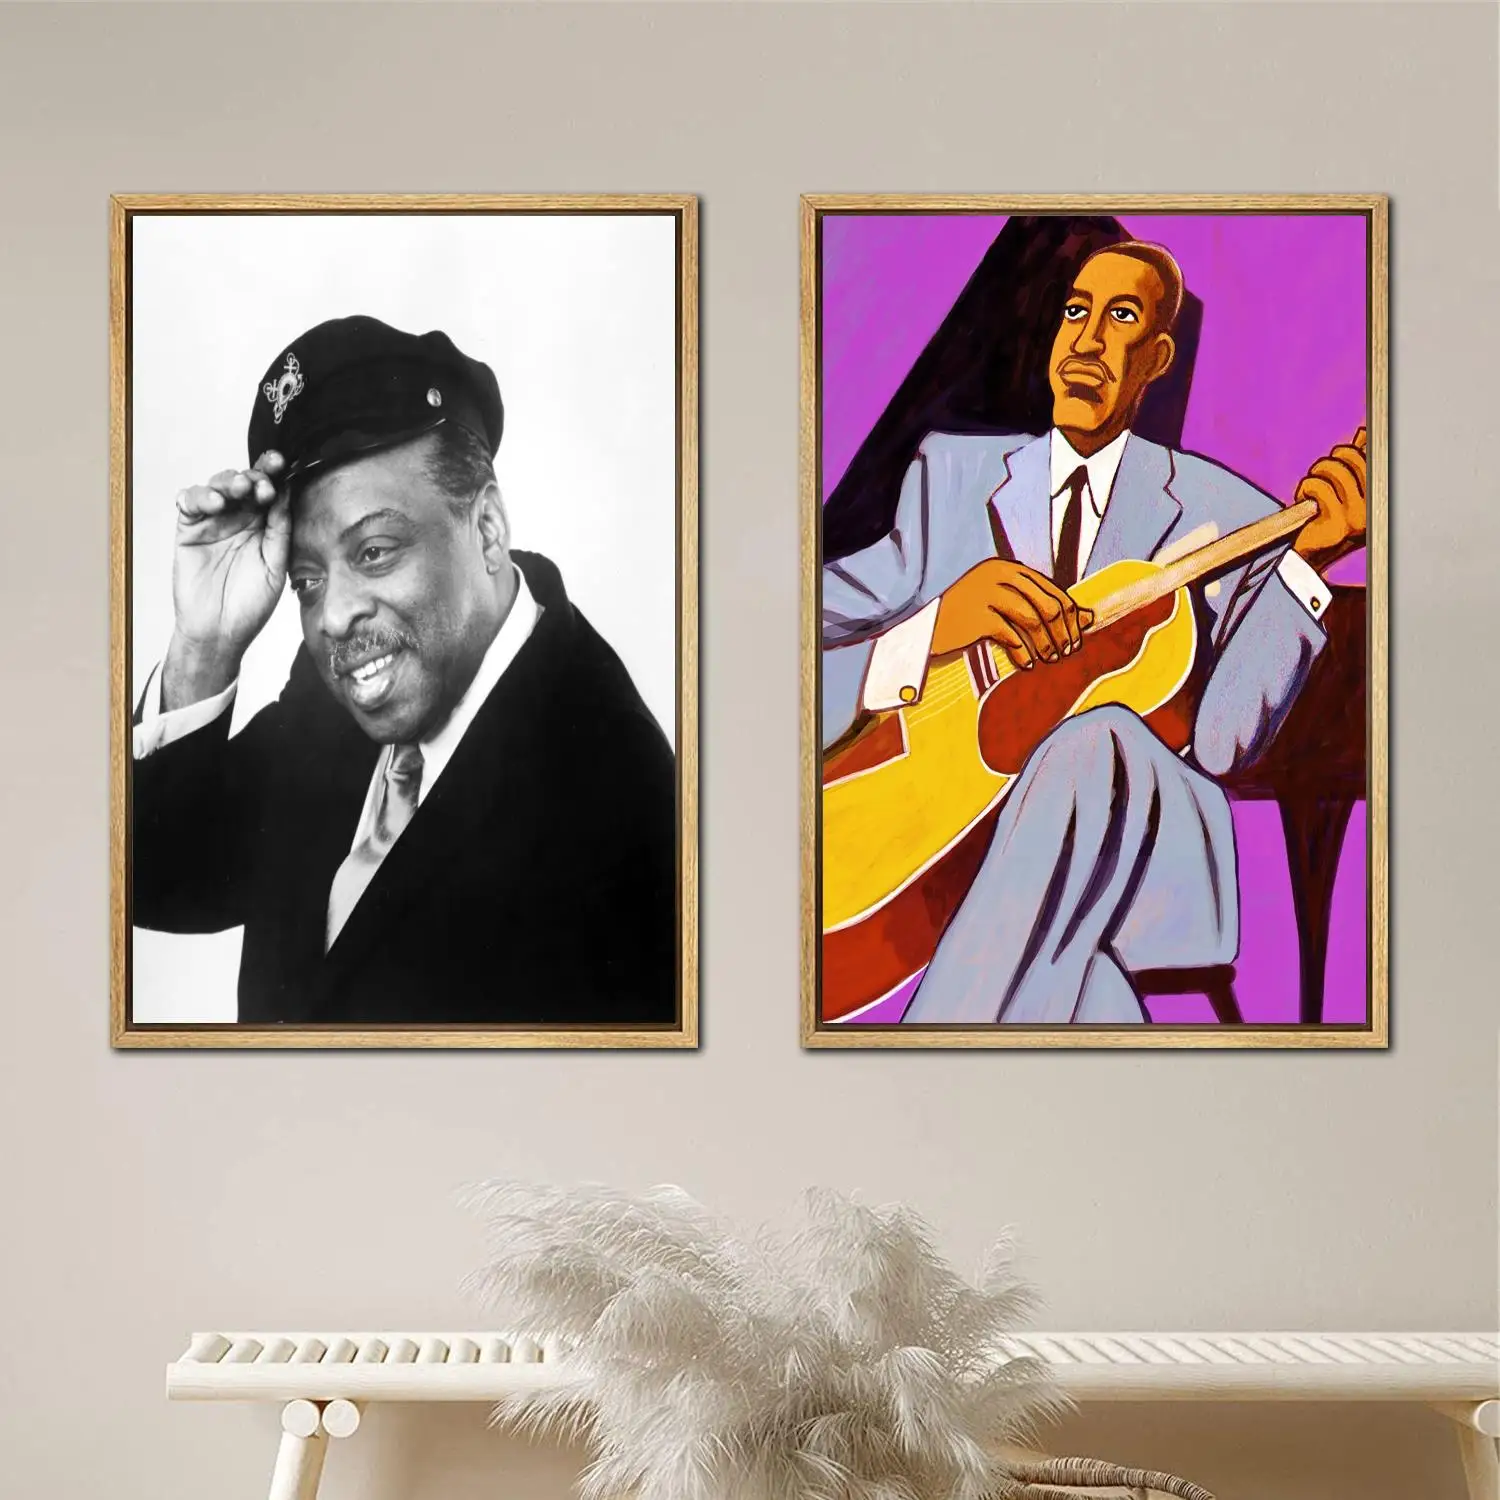 Count Basie Poster Painting 24x36 Wall Art Canvas Posters room decor Modern Family bedroom Decoration Art wall decor